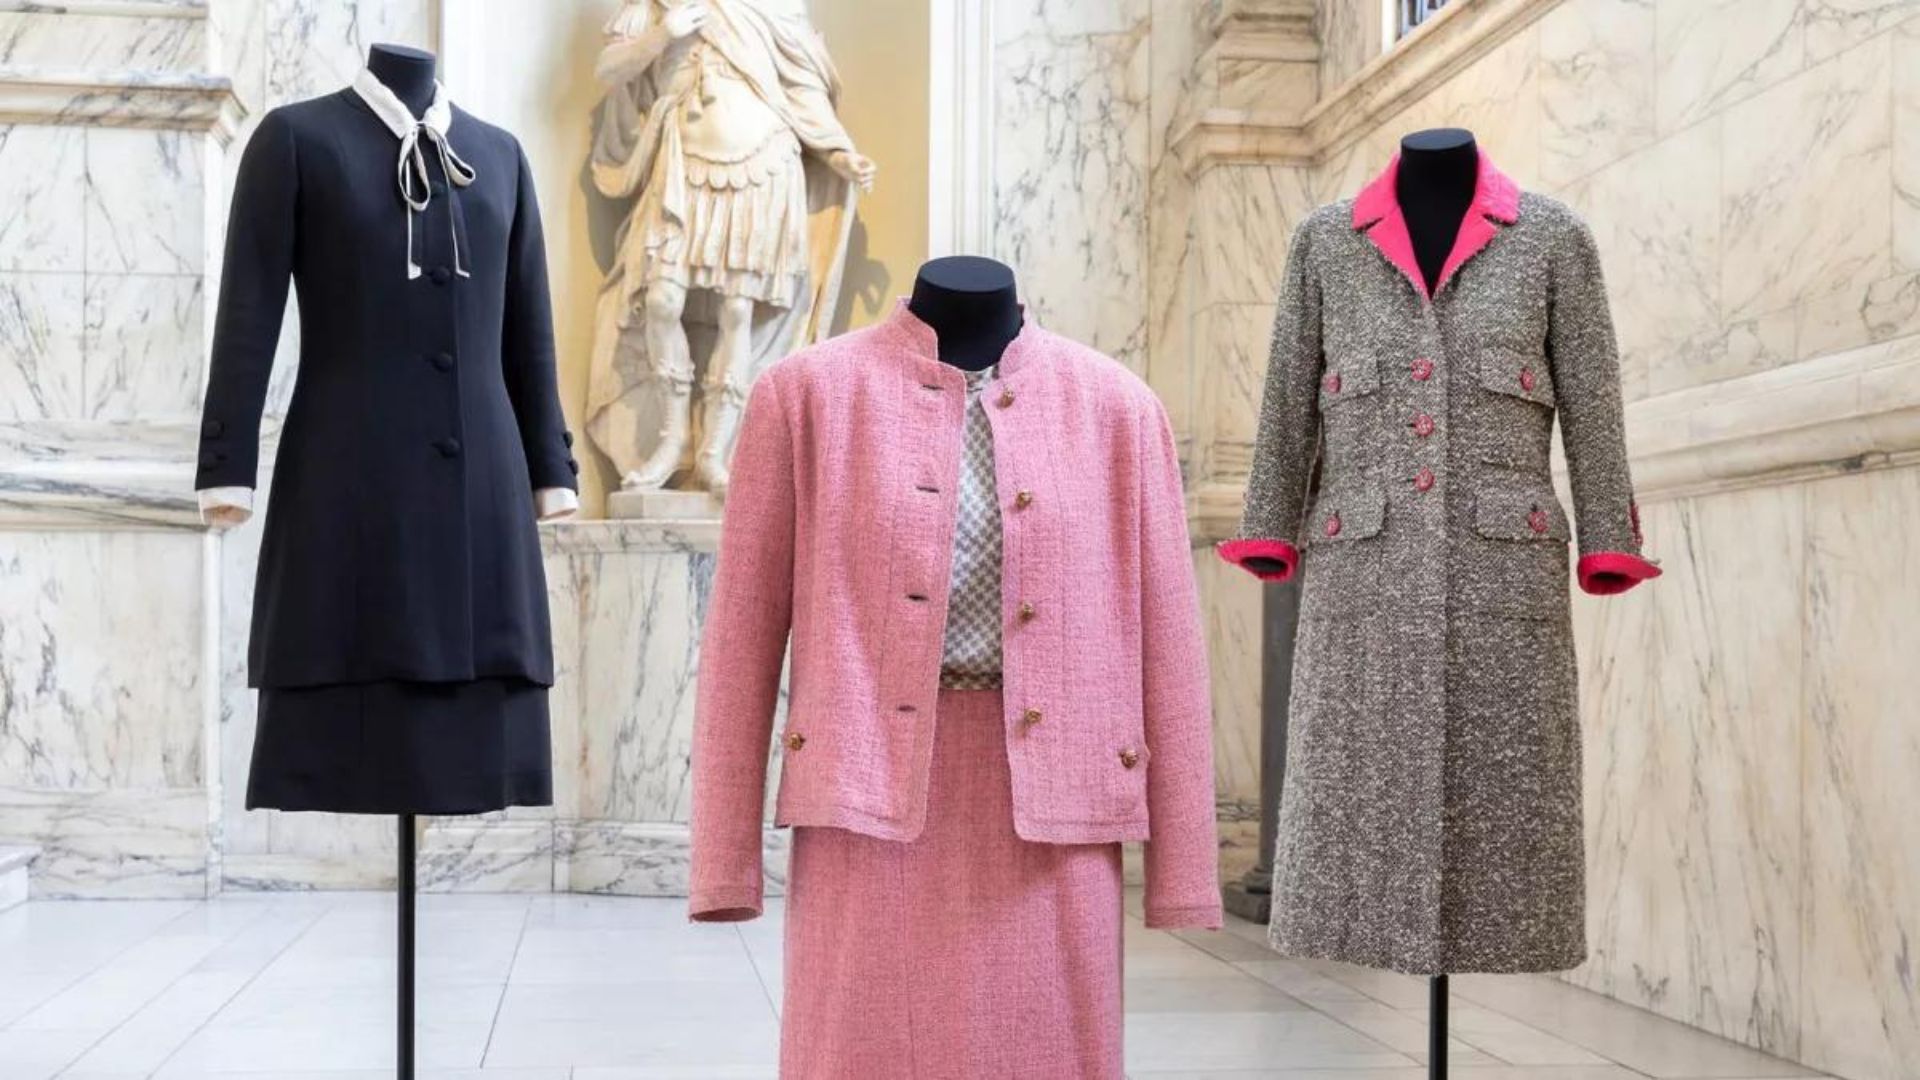 three outfits made by iconic fashion designers